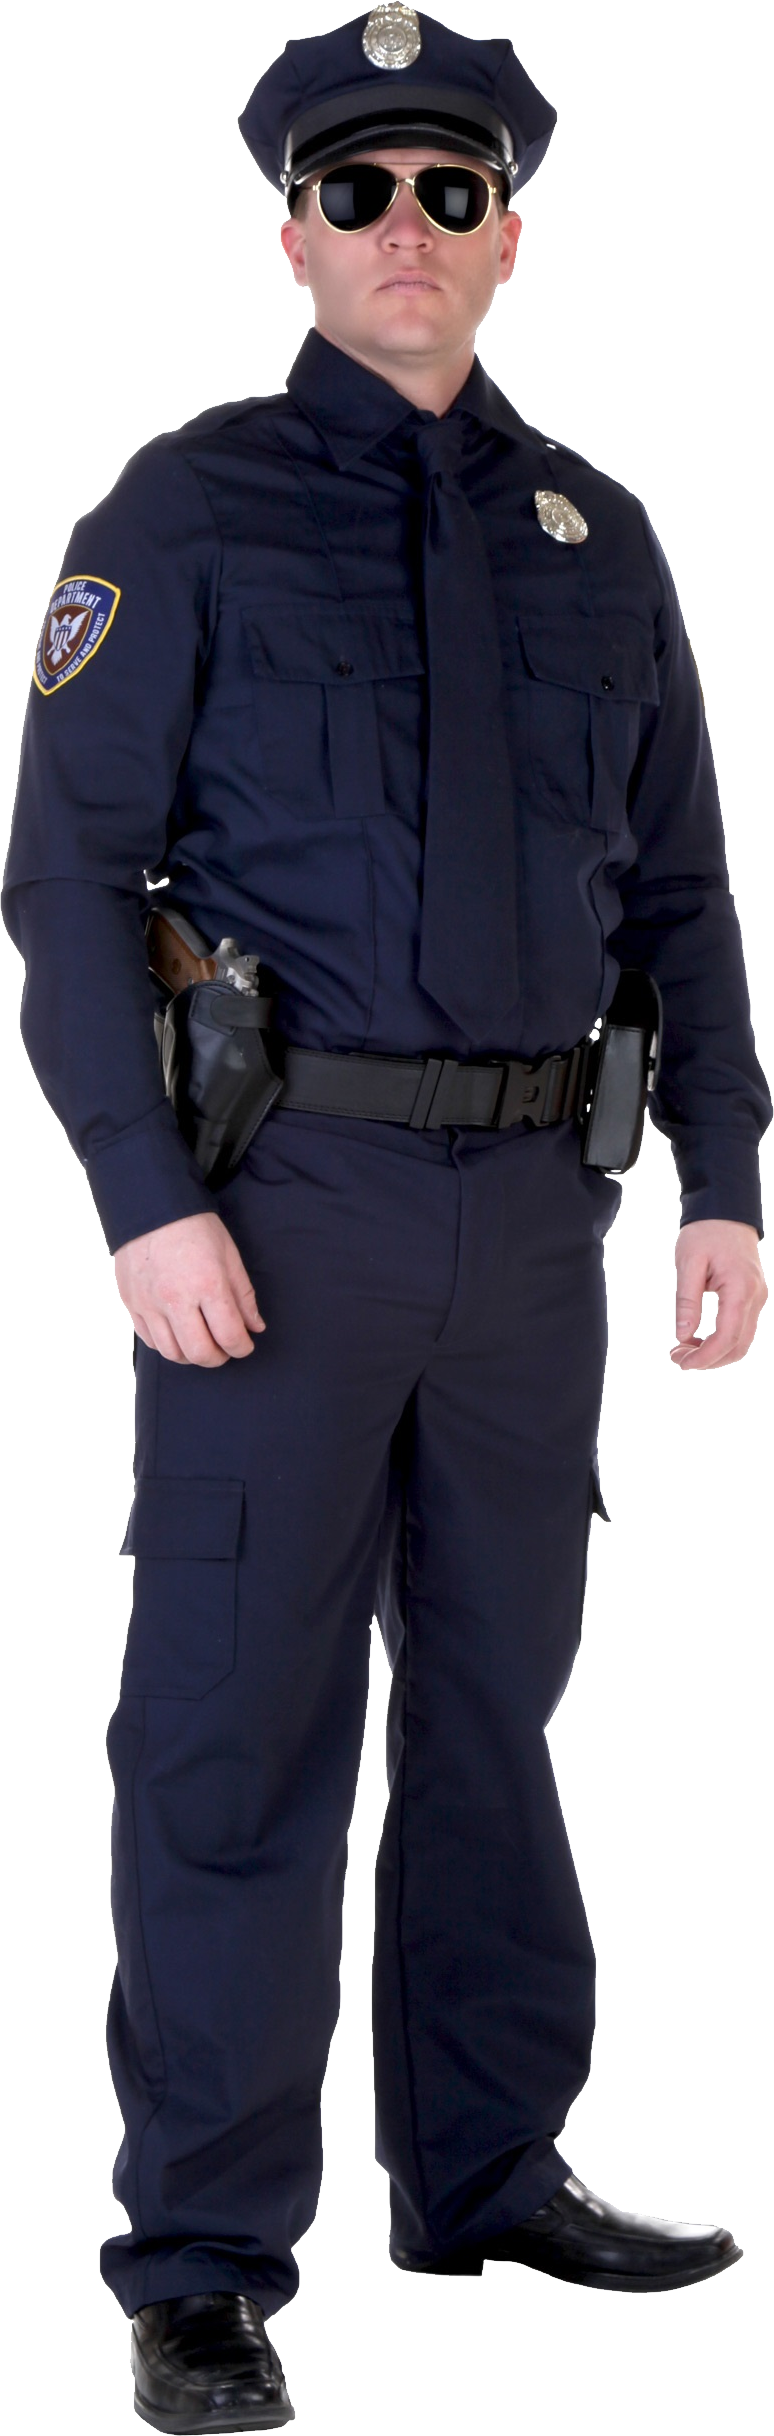 Fat clipart police officer. Picture of a policeman